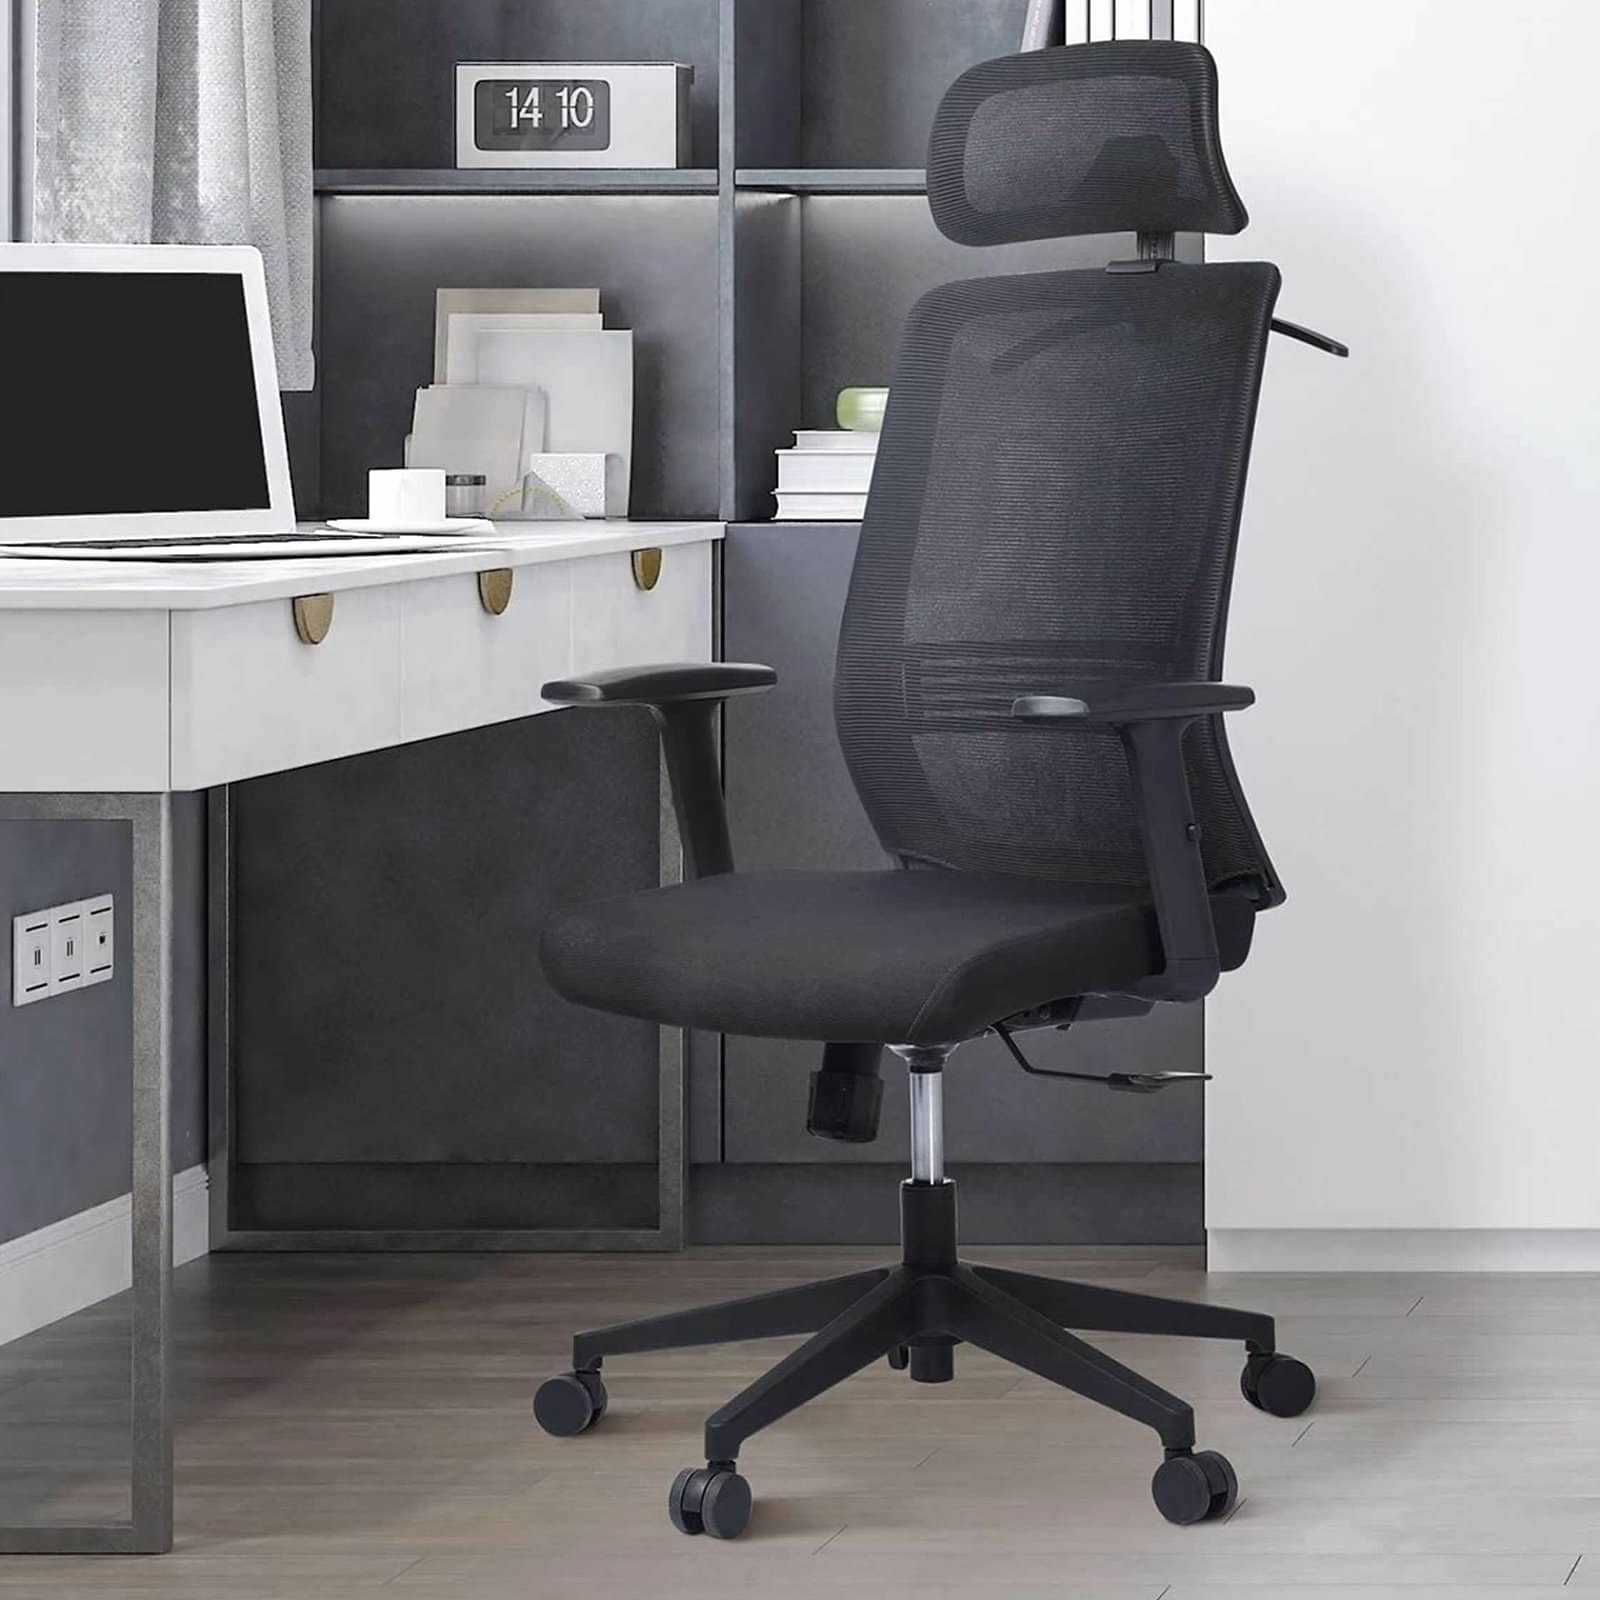 https://ak1.ostkcdn.com/images/products/is/images/direct/6562455aace0f1fe1d6eea16ba516d0422c74275/Happy-Living-Ergonomic-Adjustable-Mesh-Office-Chair-with-Coat-Hanger.jpg